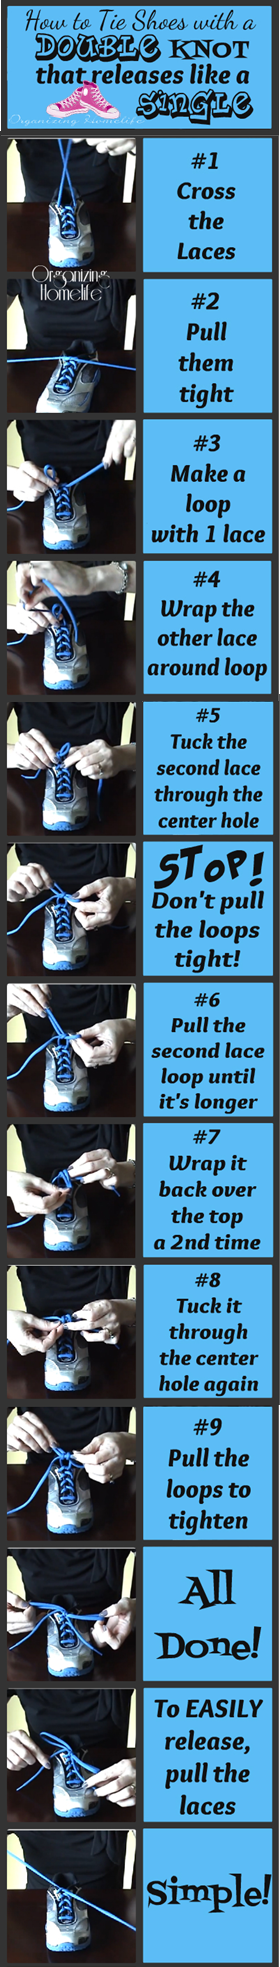 how to tie a double knot shoelace